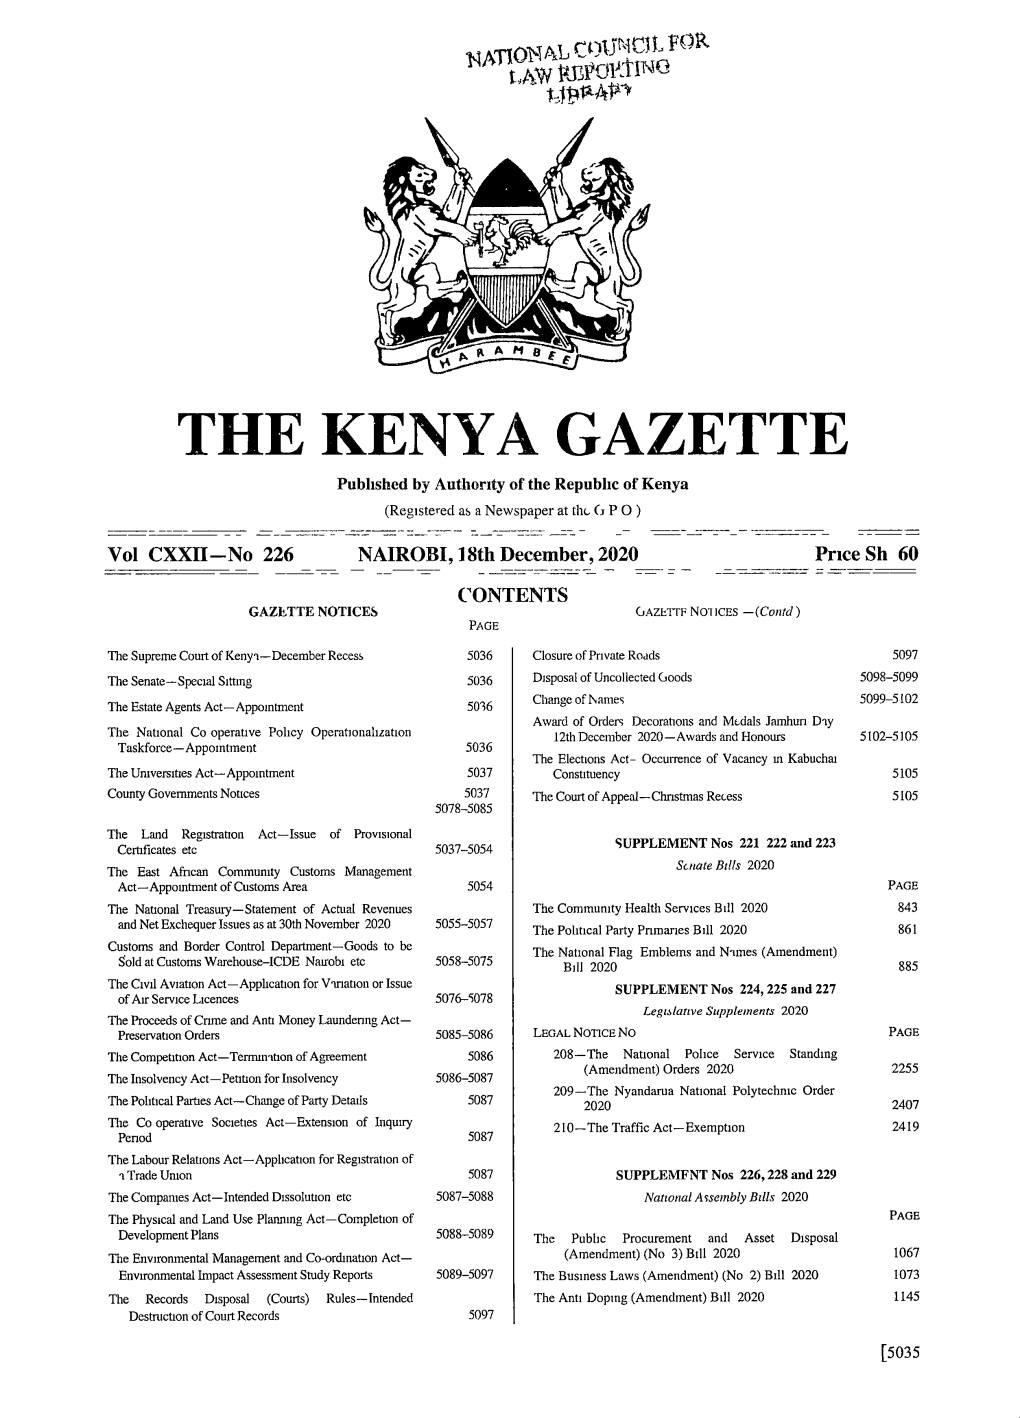 THE KENYA GAZETTE Published by Authority of the Republic of Kenya (Registered As a Newspaper at the Fj P O)